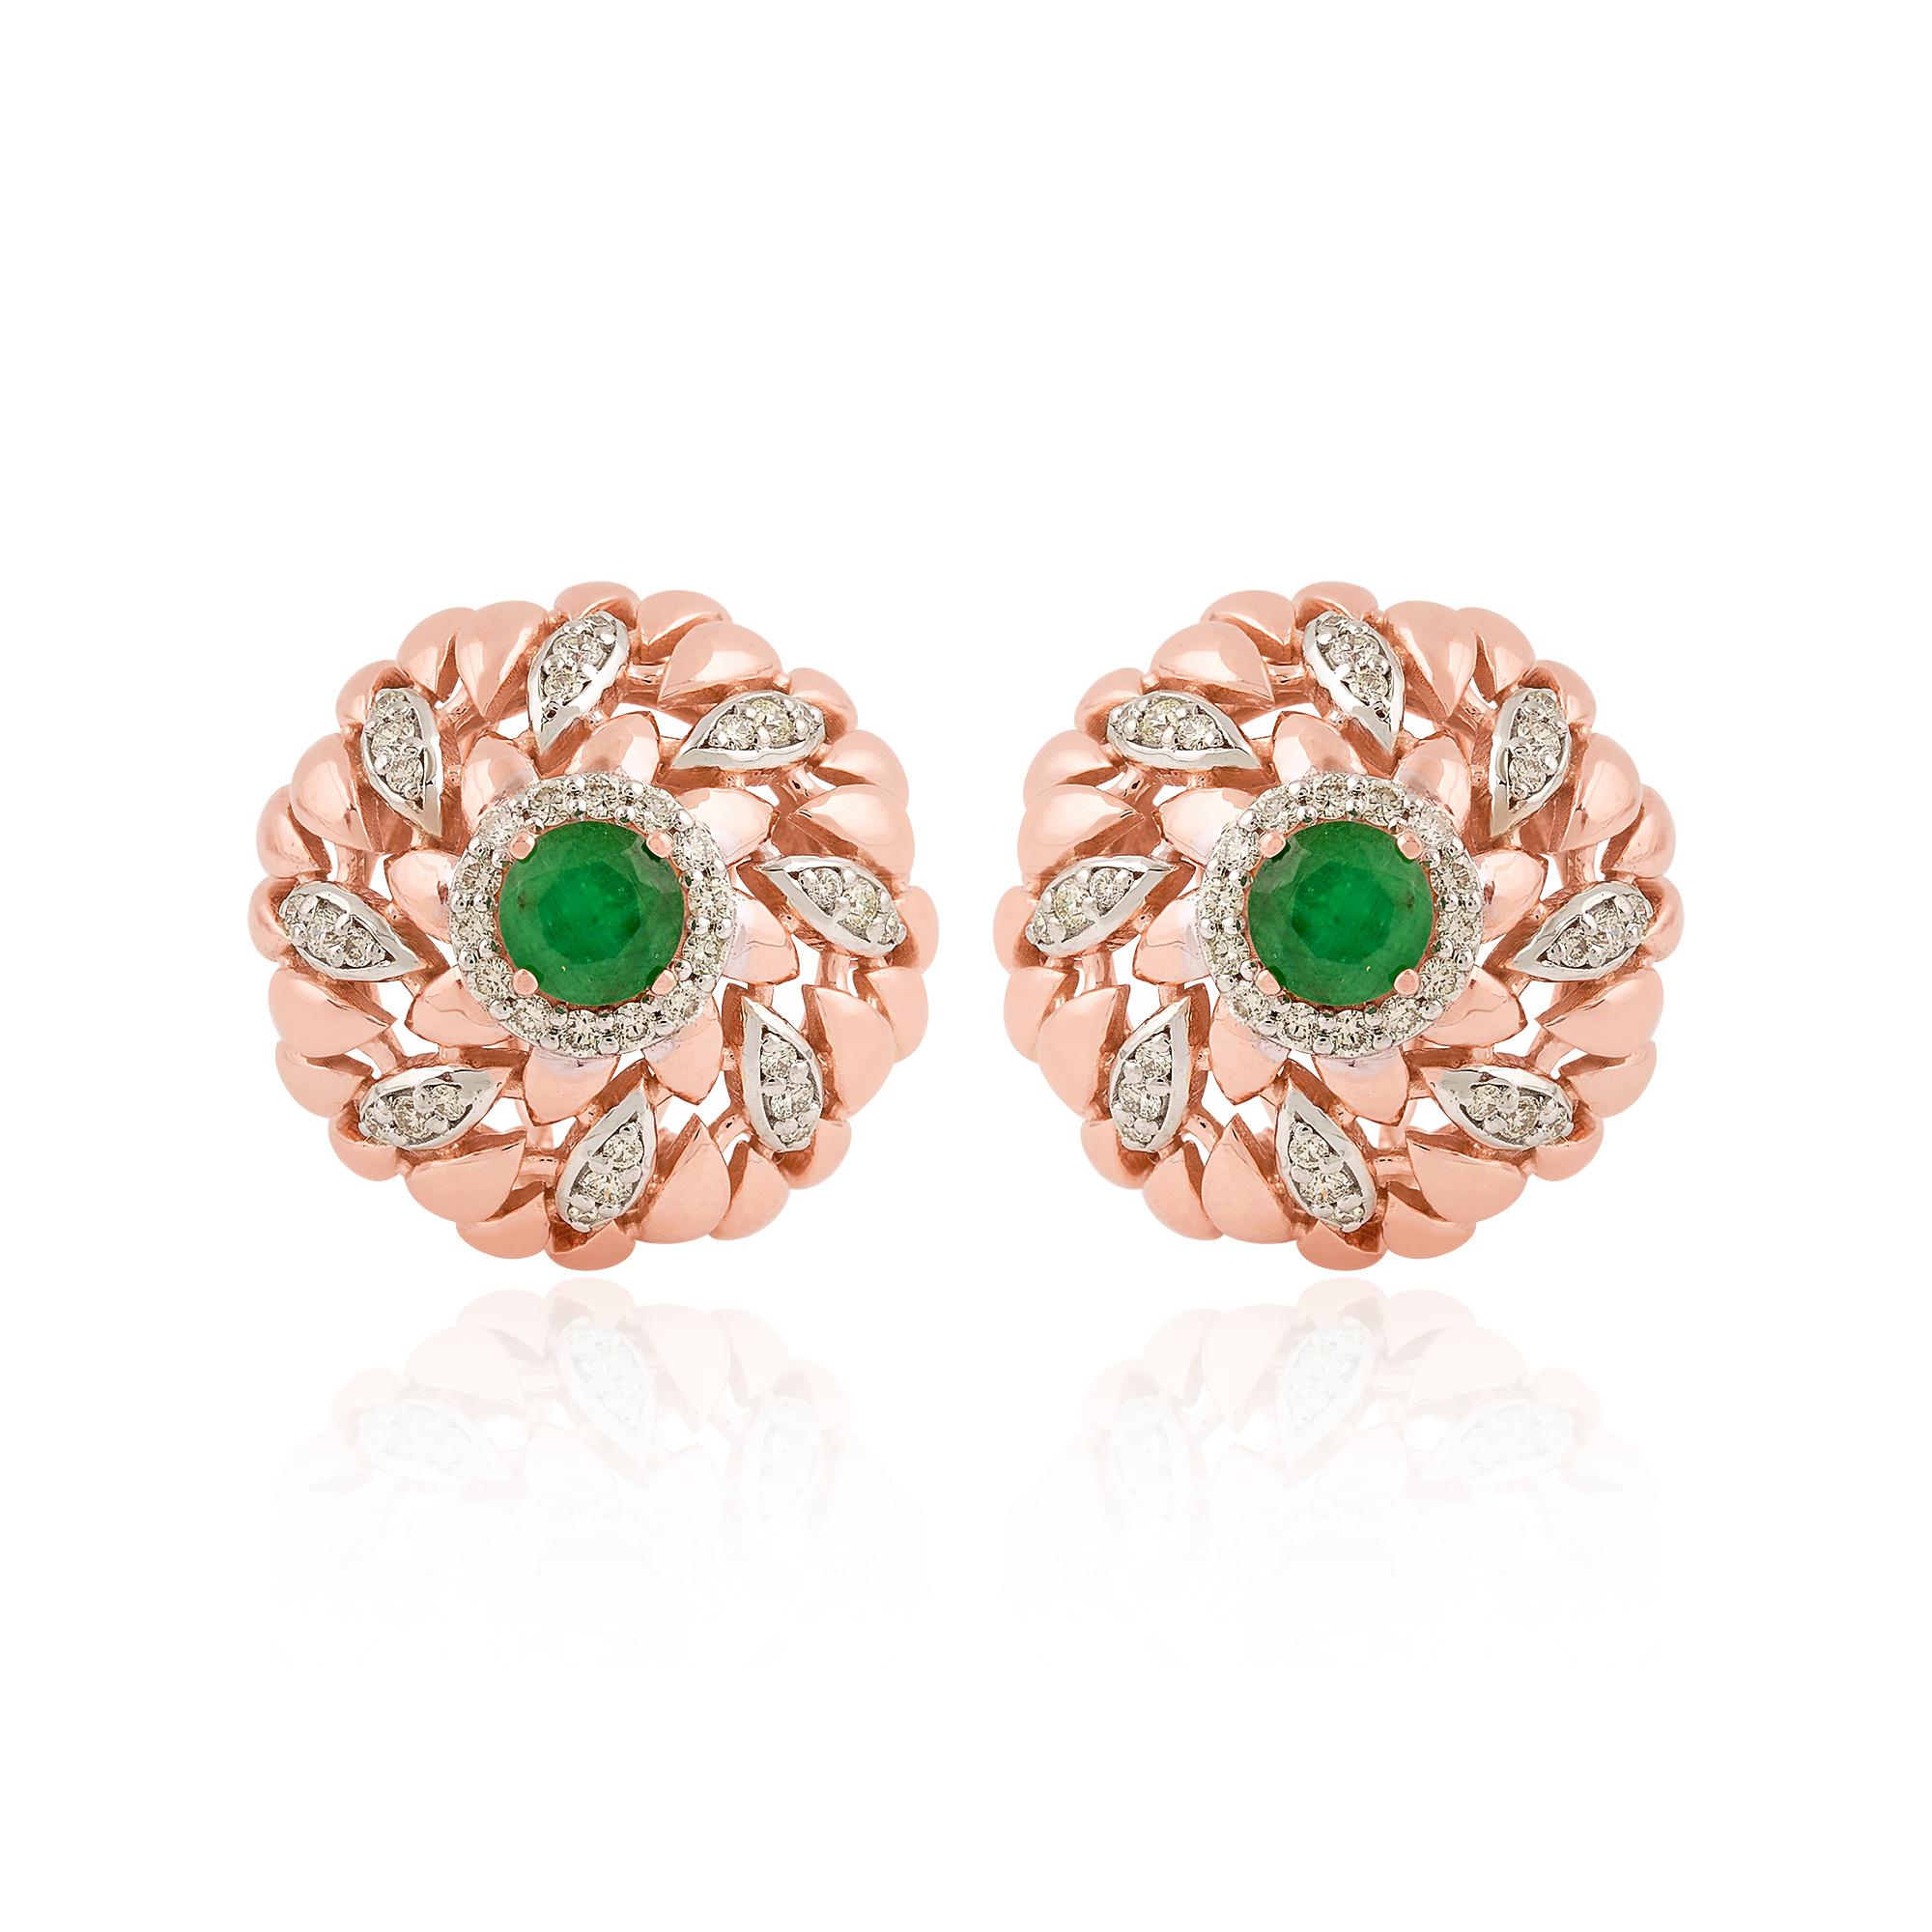 Modern Natural Emerald Gemstone Stud Earrings Diamond Pave Solid 18k Rose Gold Jewelry For Sale